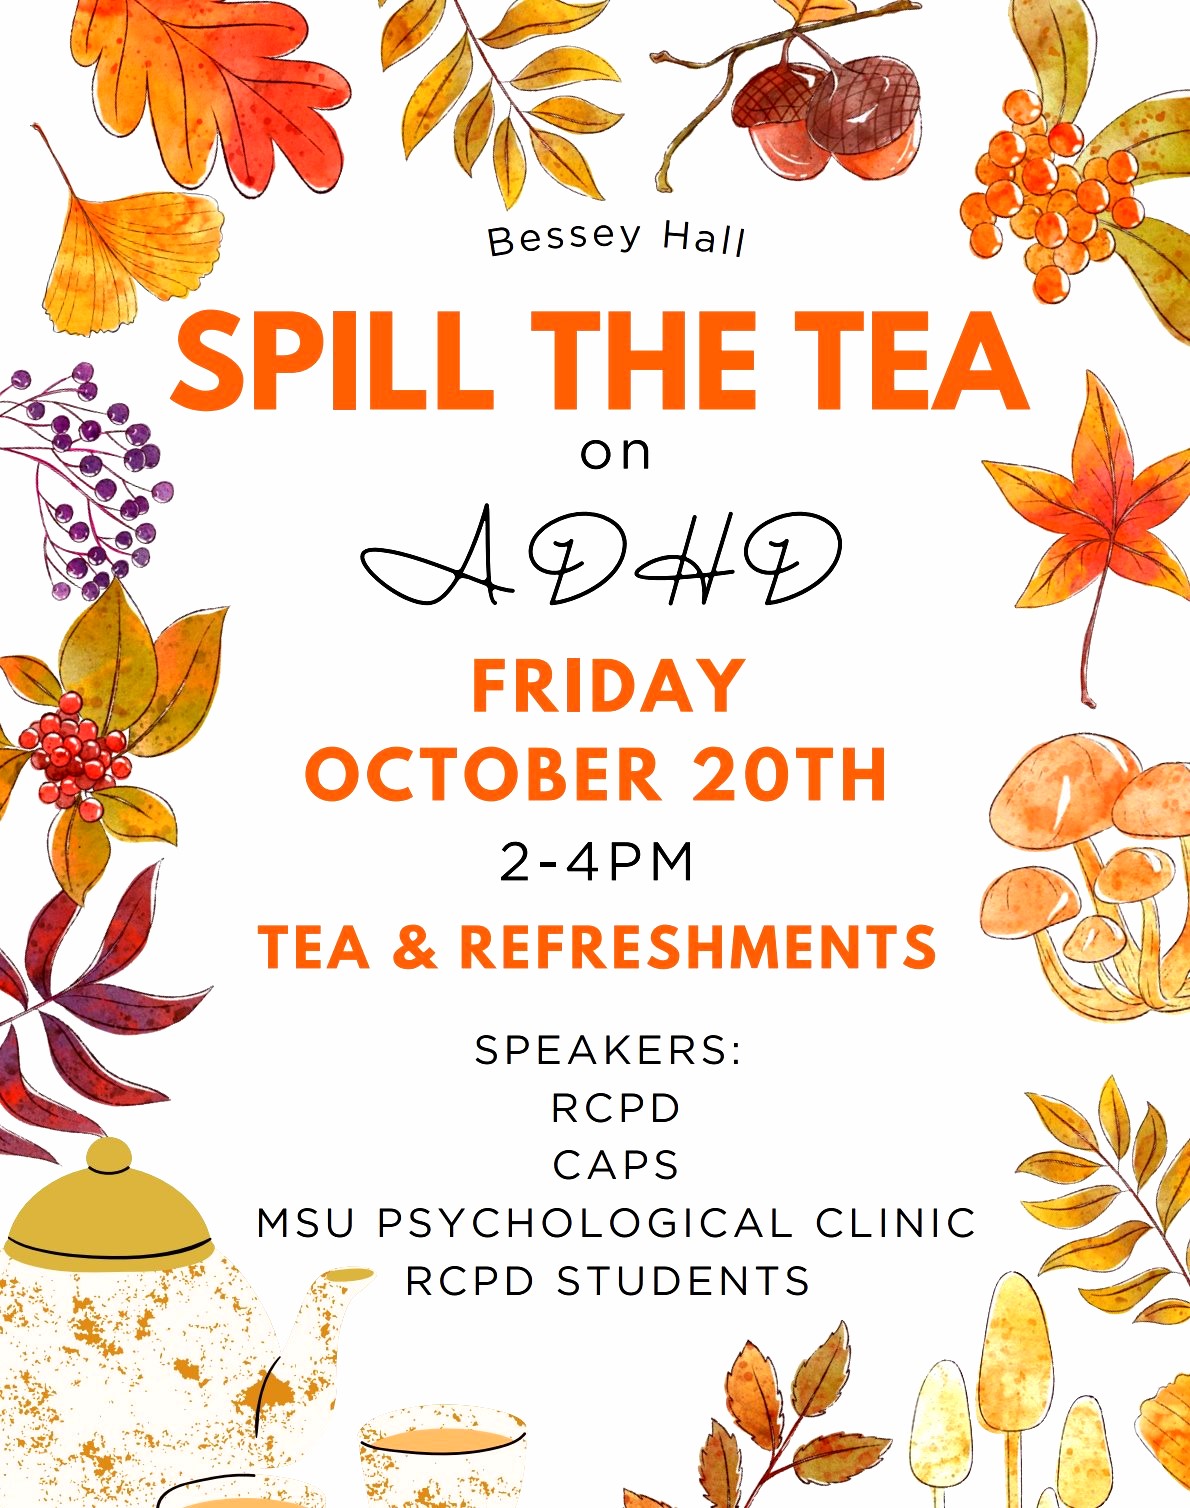 Bessey Hall, Spill the Tea on ADHD. Friday Oct. 20th 2-4pm. Tea and refreshments. Speakers: RCPD, CAPS, MSU Psychological Clinic, RCPD Students